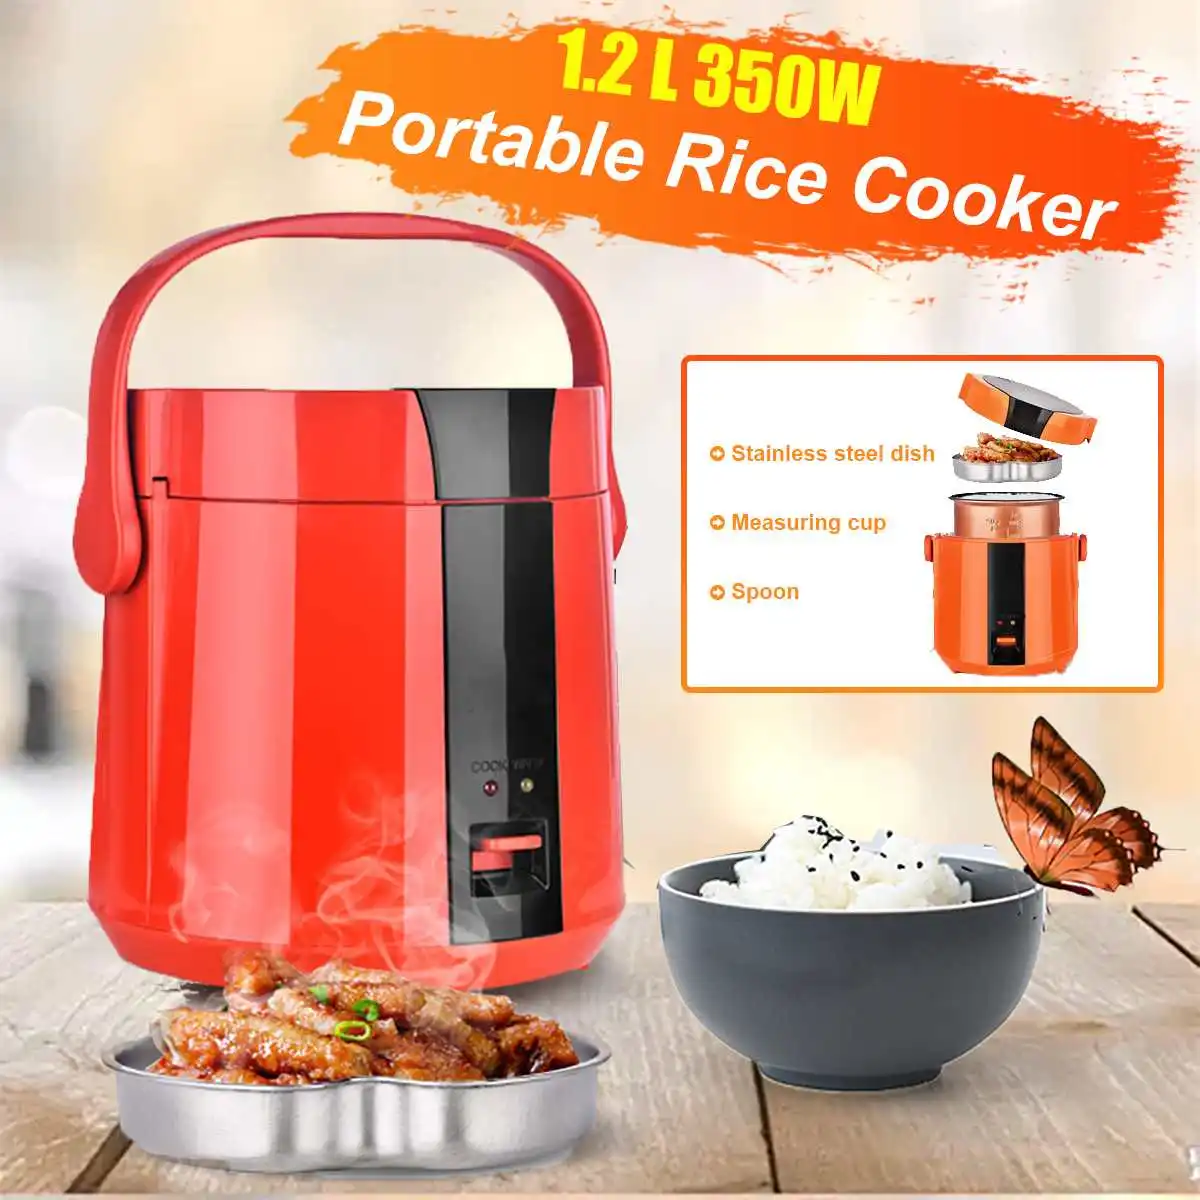 

1.2L Mini Rice Cooker Small 2 Layers Steamer Multifunction Cooking Pot Electric Insulation Heating Cooker for 1-2 People